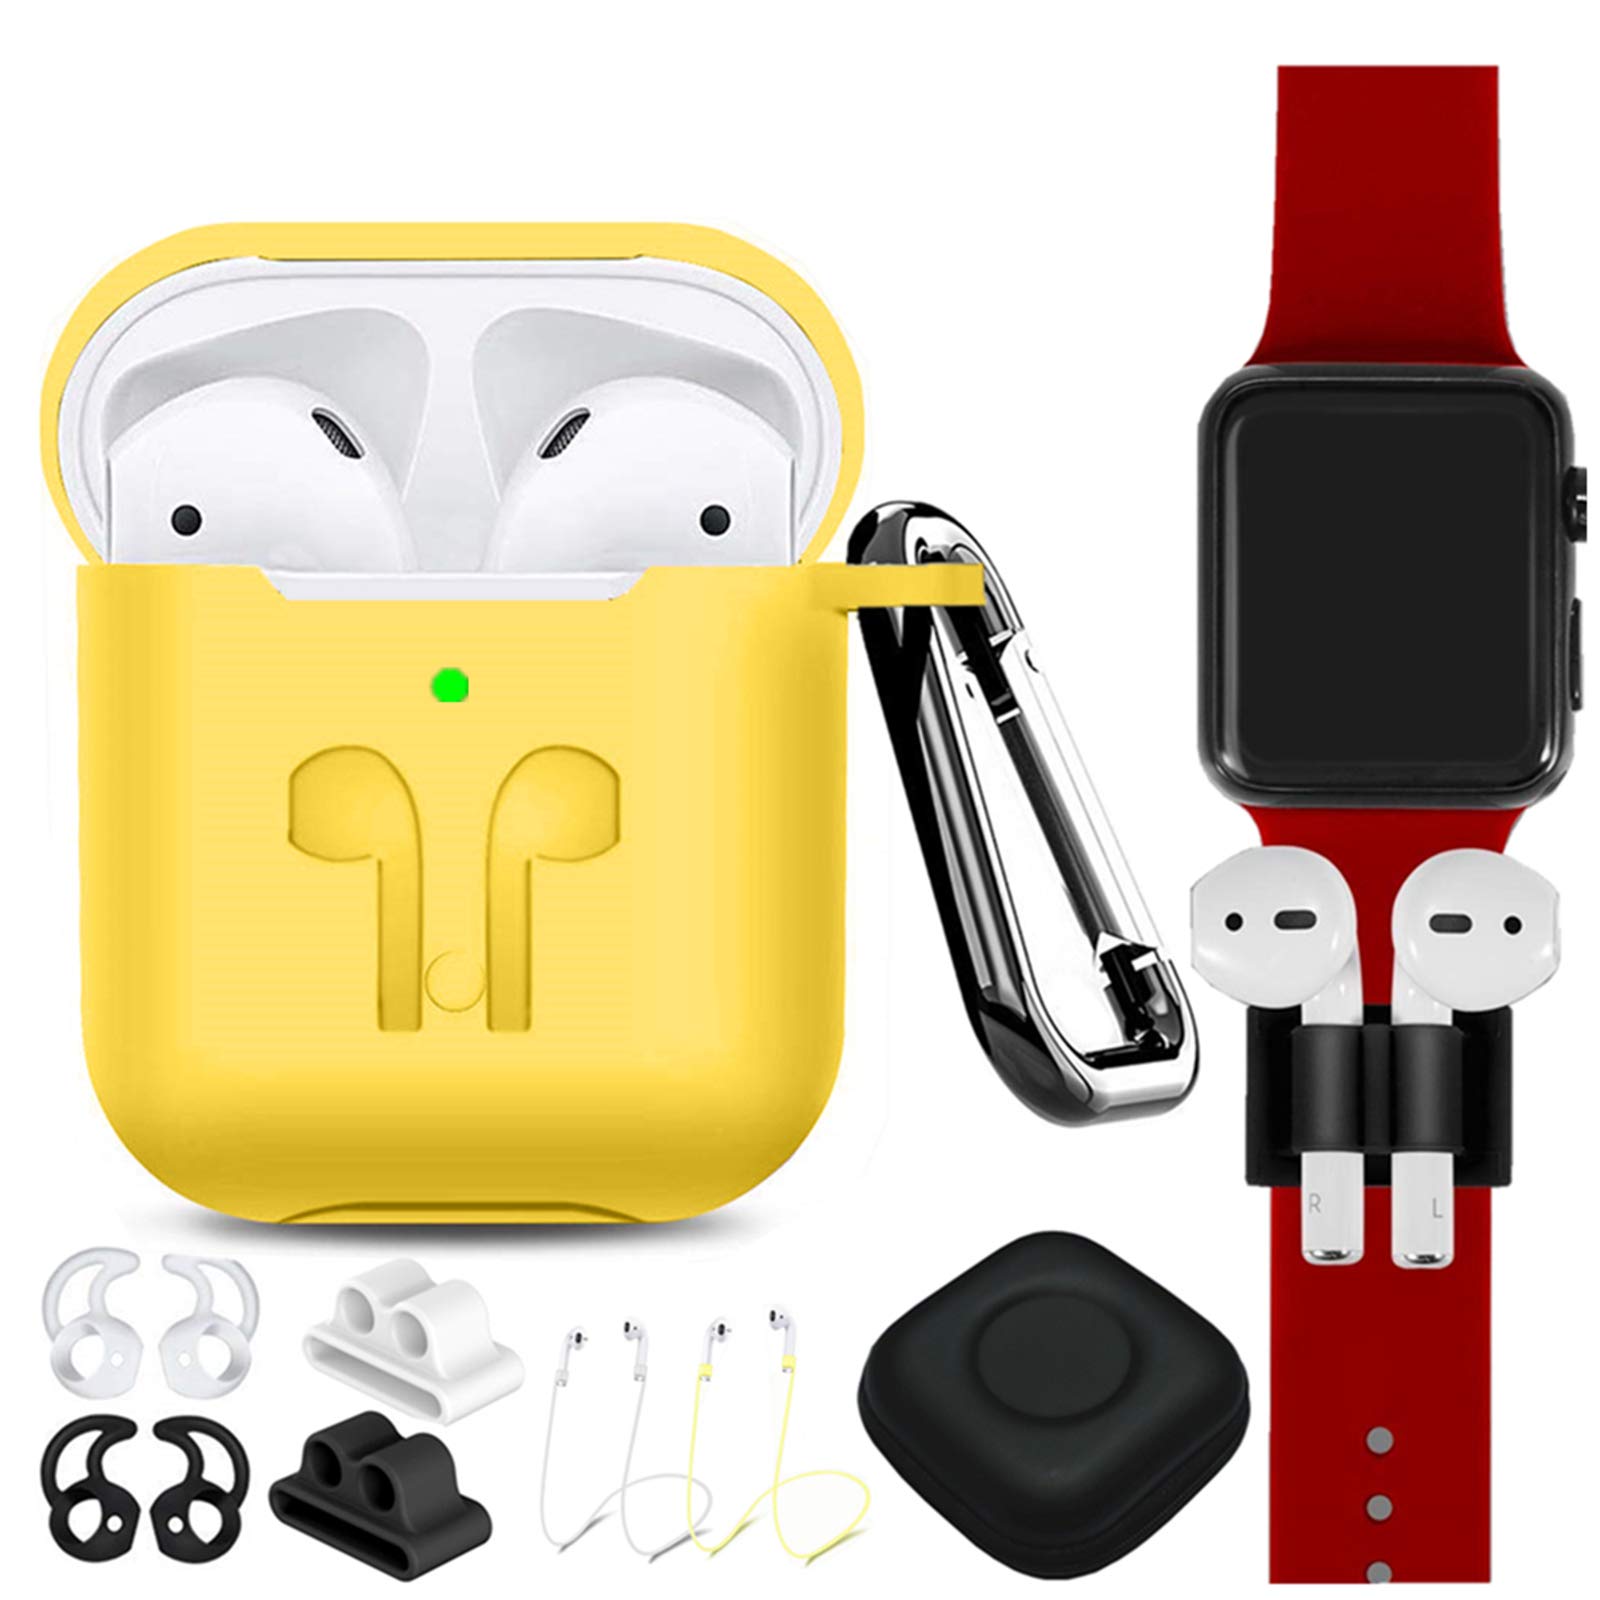 Book Cover AirPods Case Cover Compatible Apple Airpods 2 & 1[Front LED Visible],9 in 1 Kits Airpods Accessories Set Protective Silicone Skin with Earpods Watch Band Holder/Ear Hook/Stap/Clip/Keychain/Grip